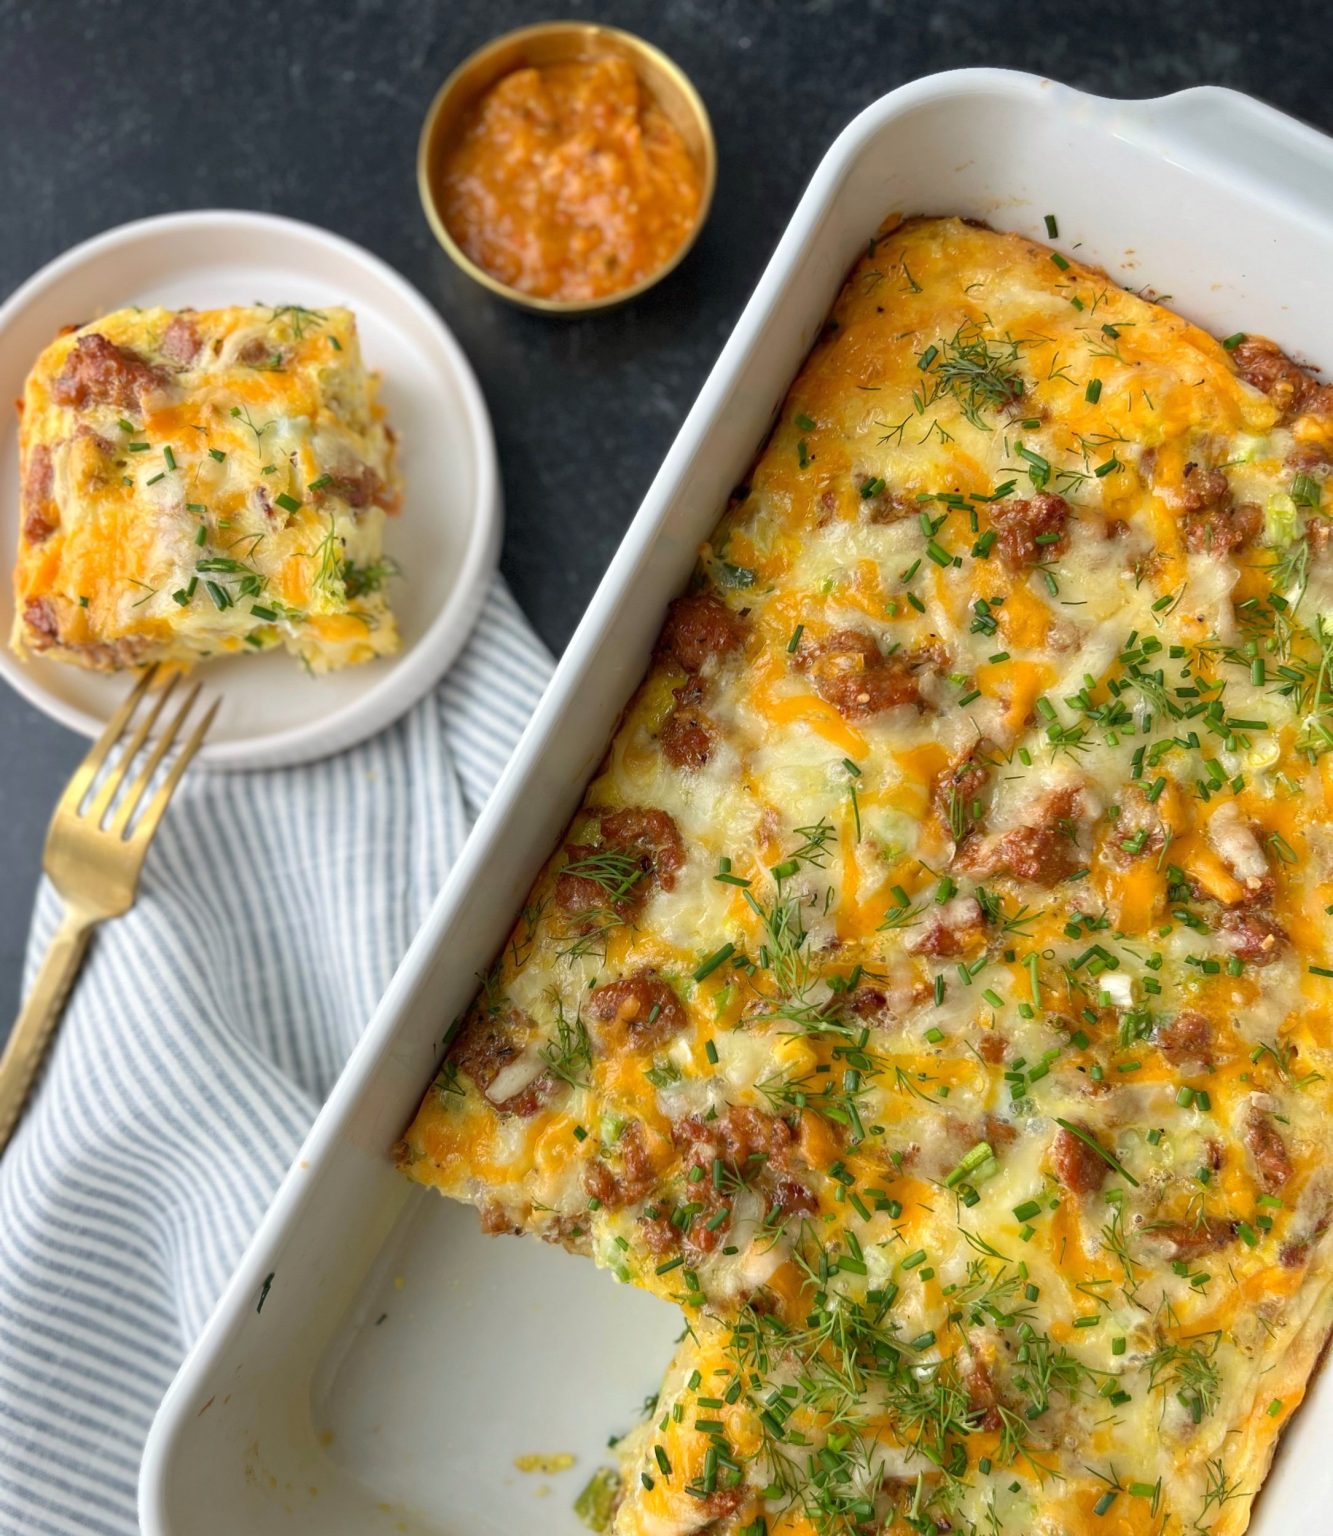 Sausage, Egg and Hash Brown Casserole